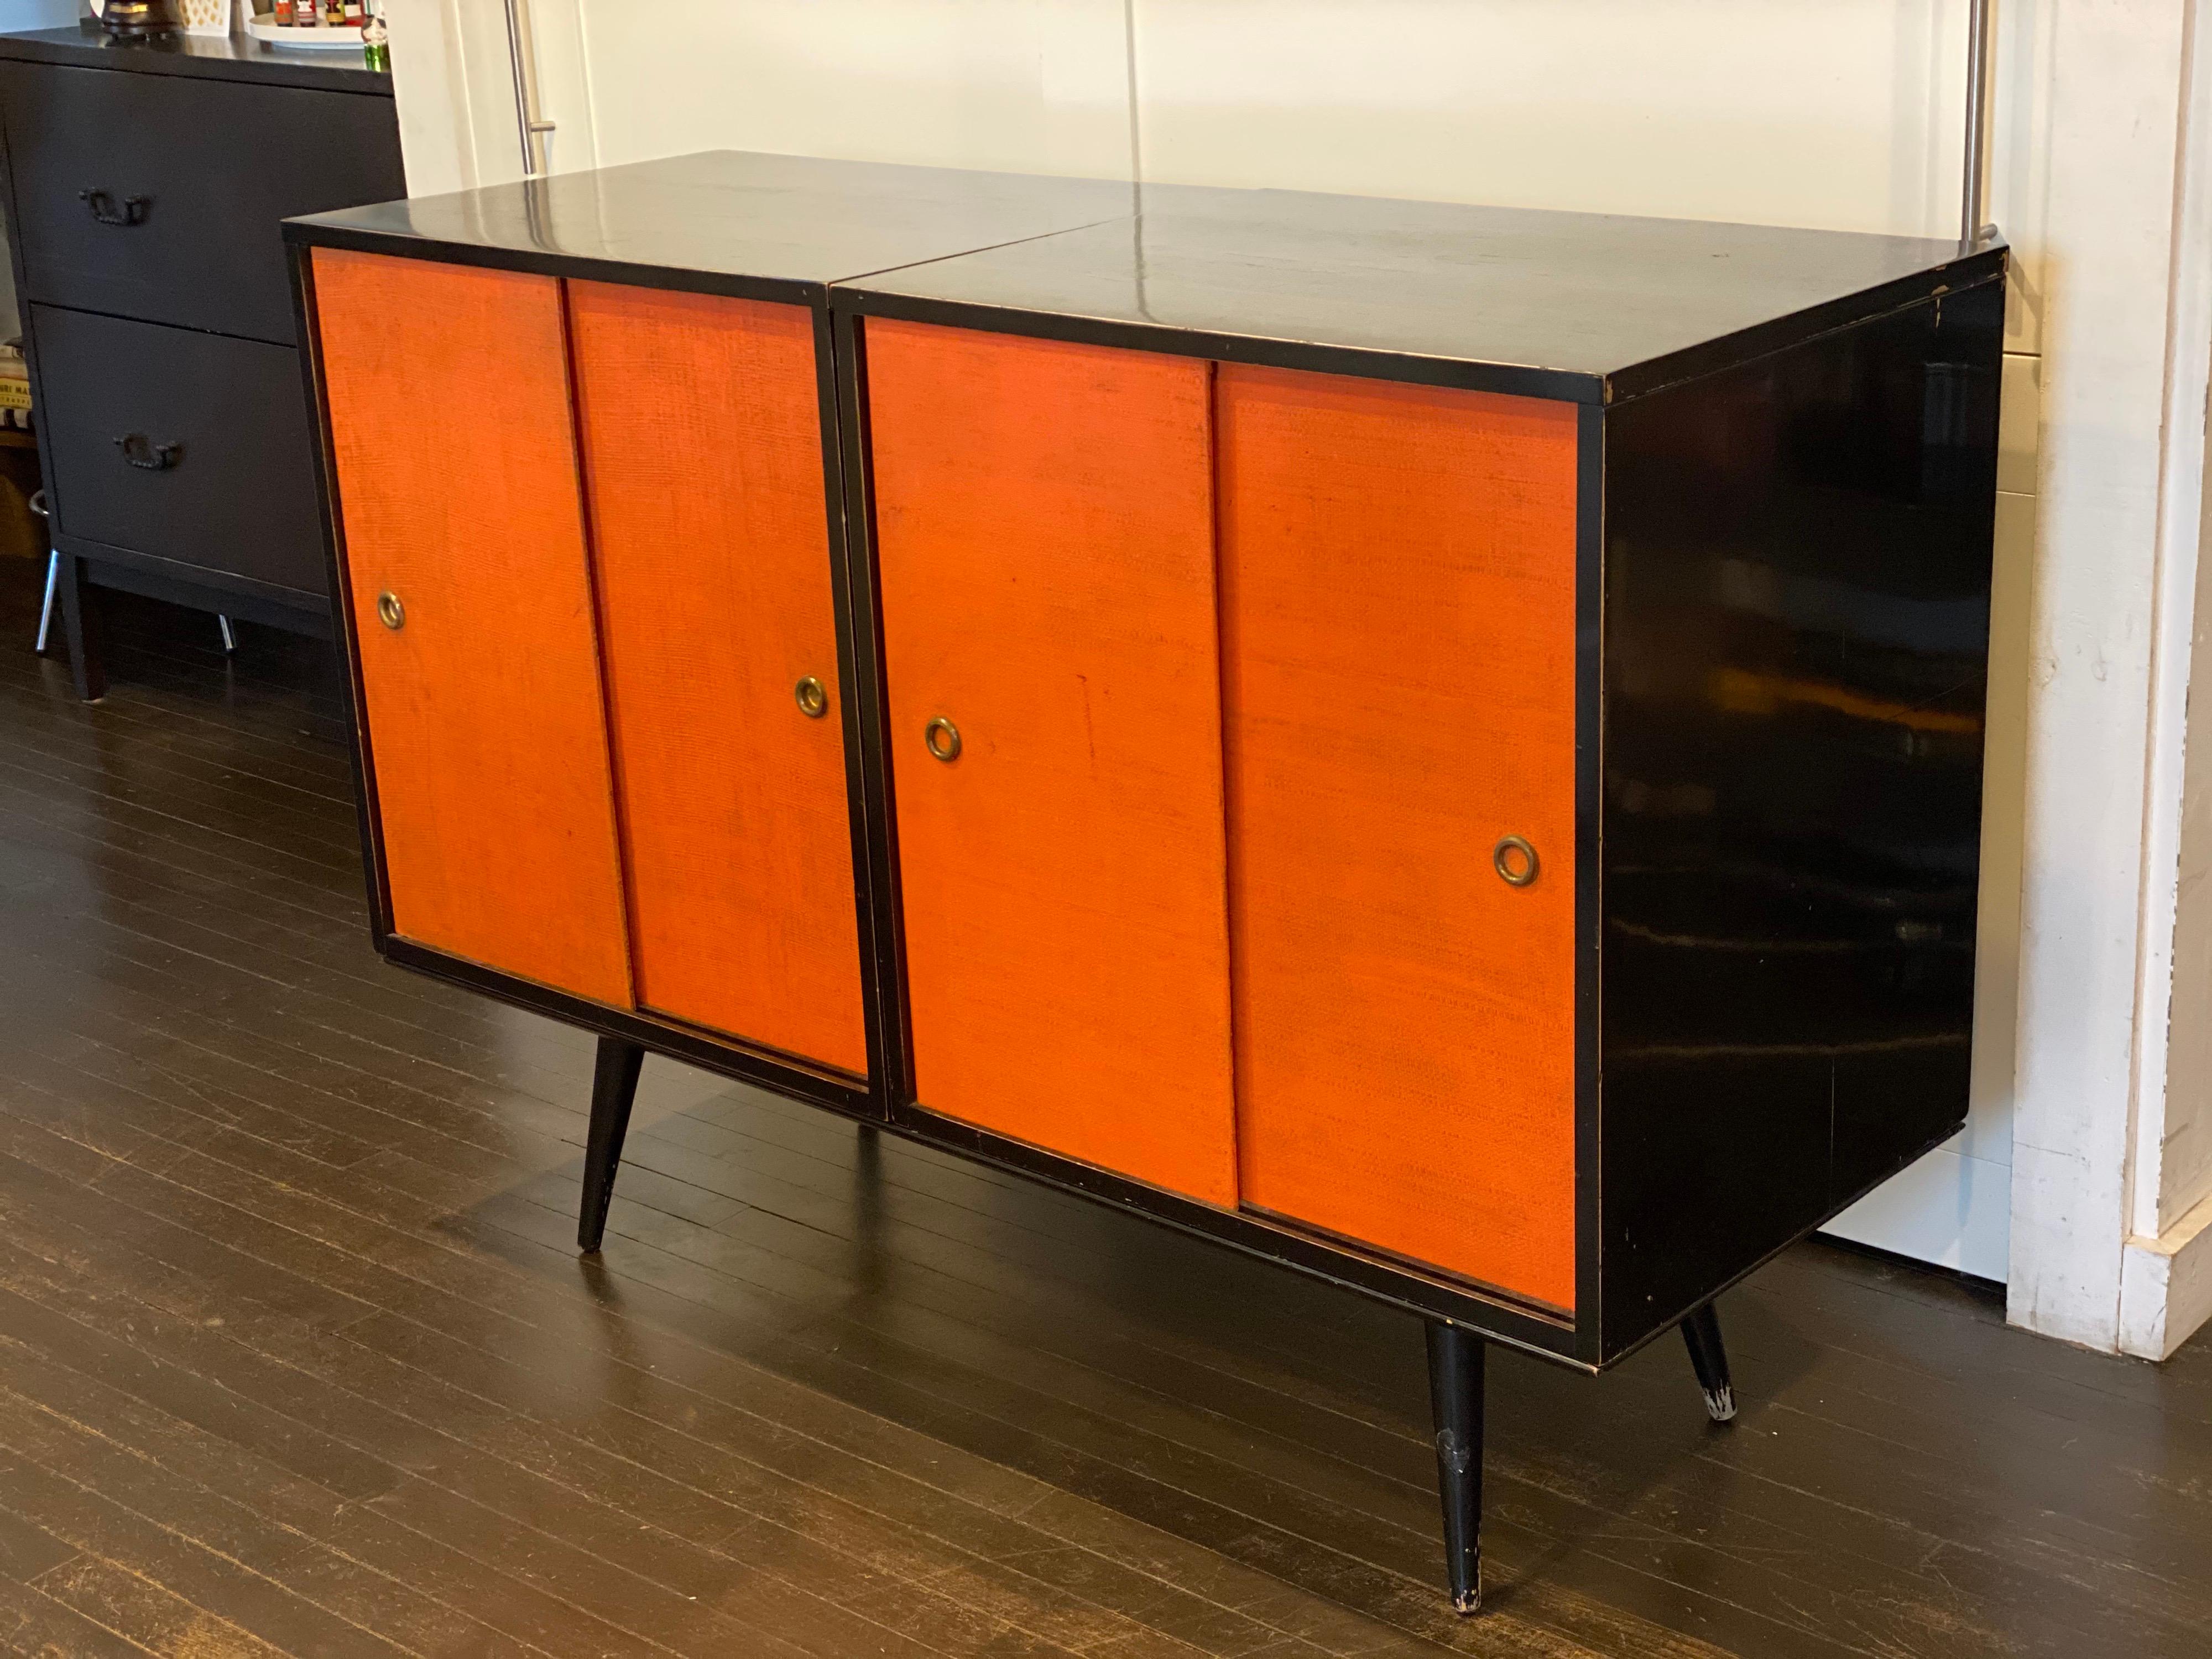 American Midcentury Paul McCobb Planner Group Four Piece Cabinets with Benches, 1950s For Sale